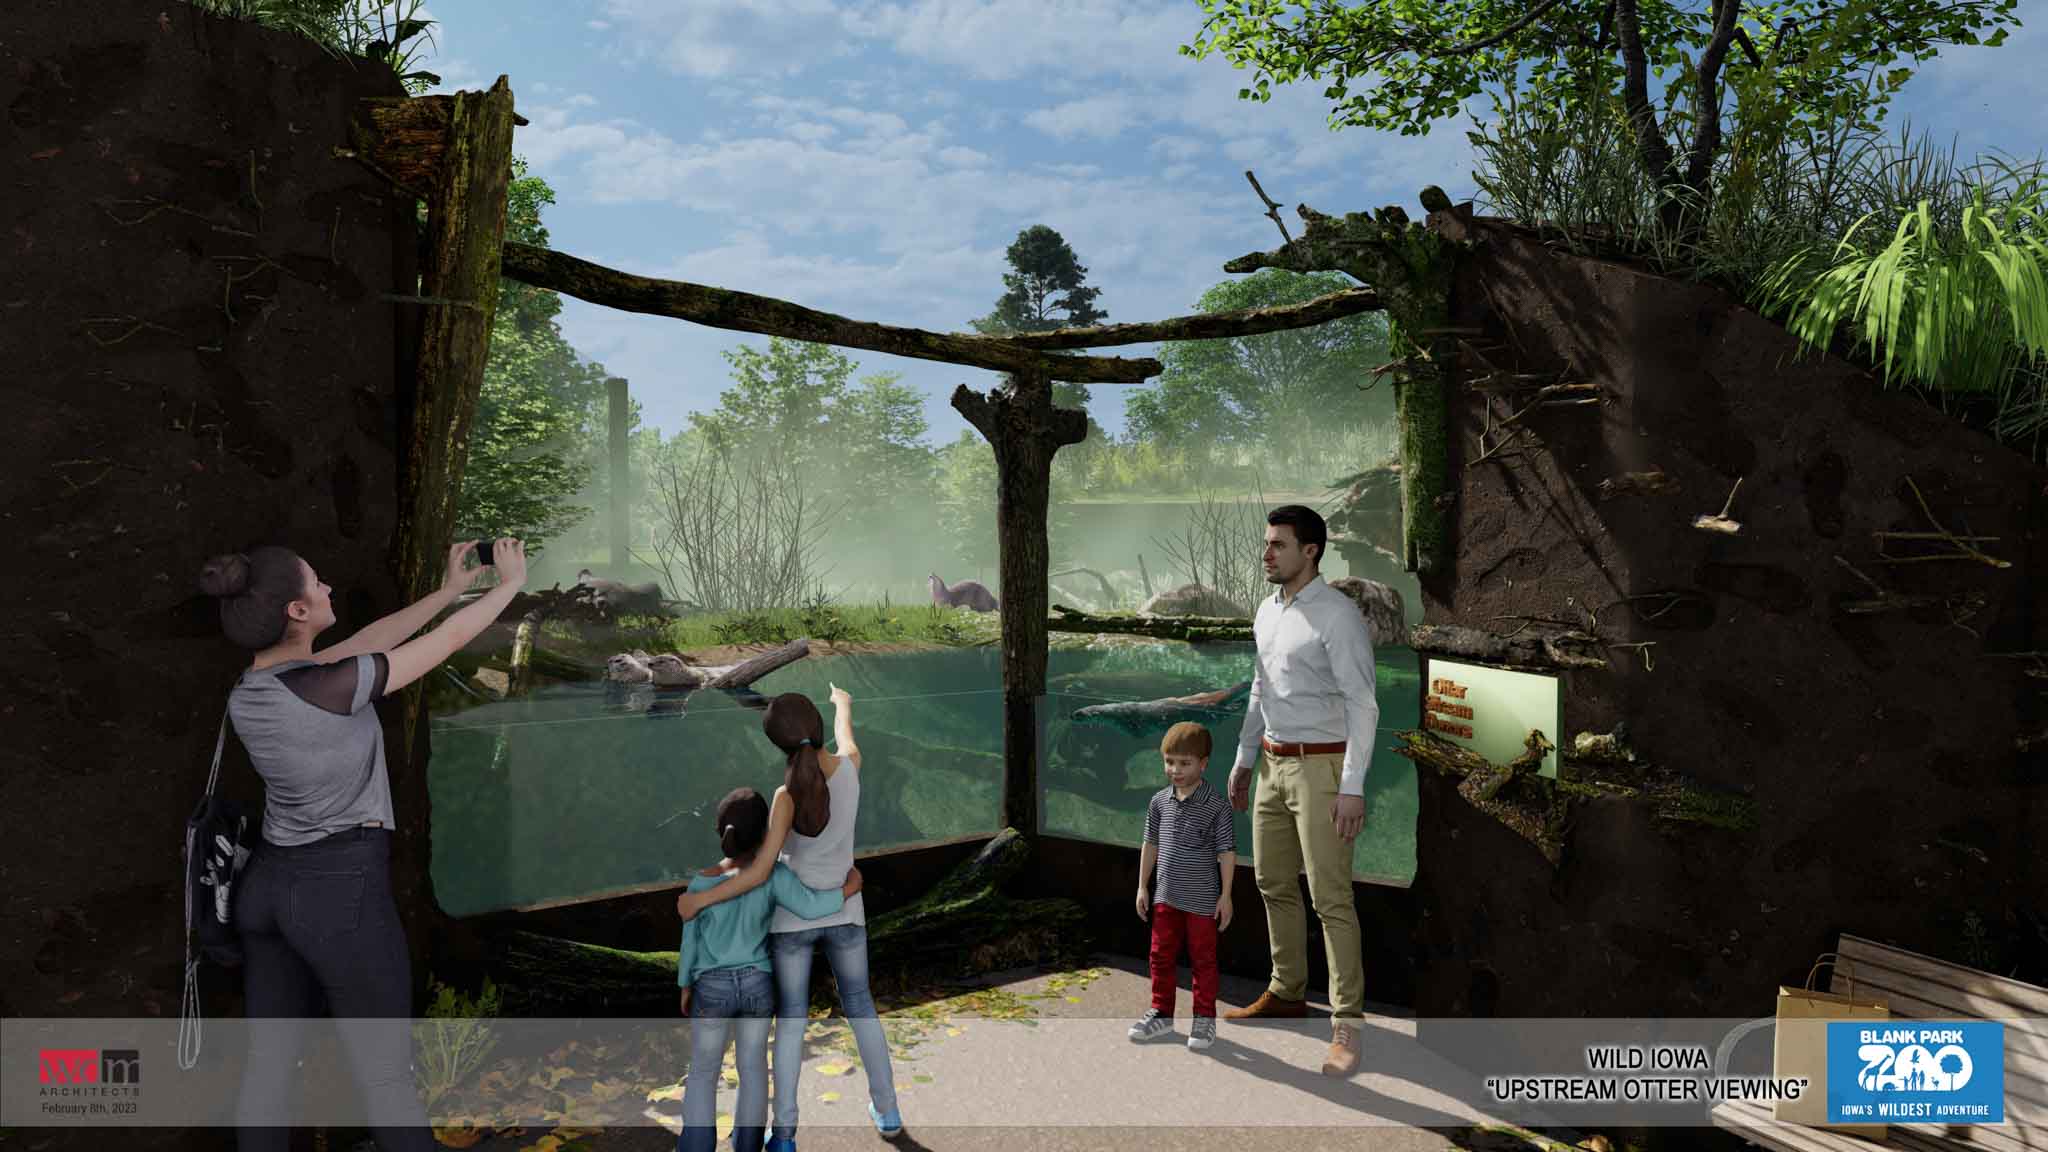 Rendering of a faily taking pictures near the shallow stream otter habitat